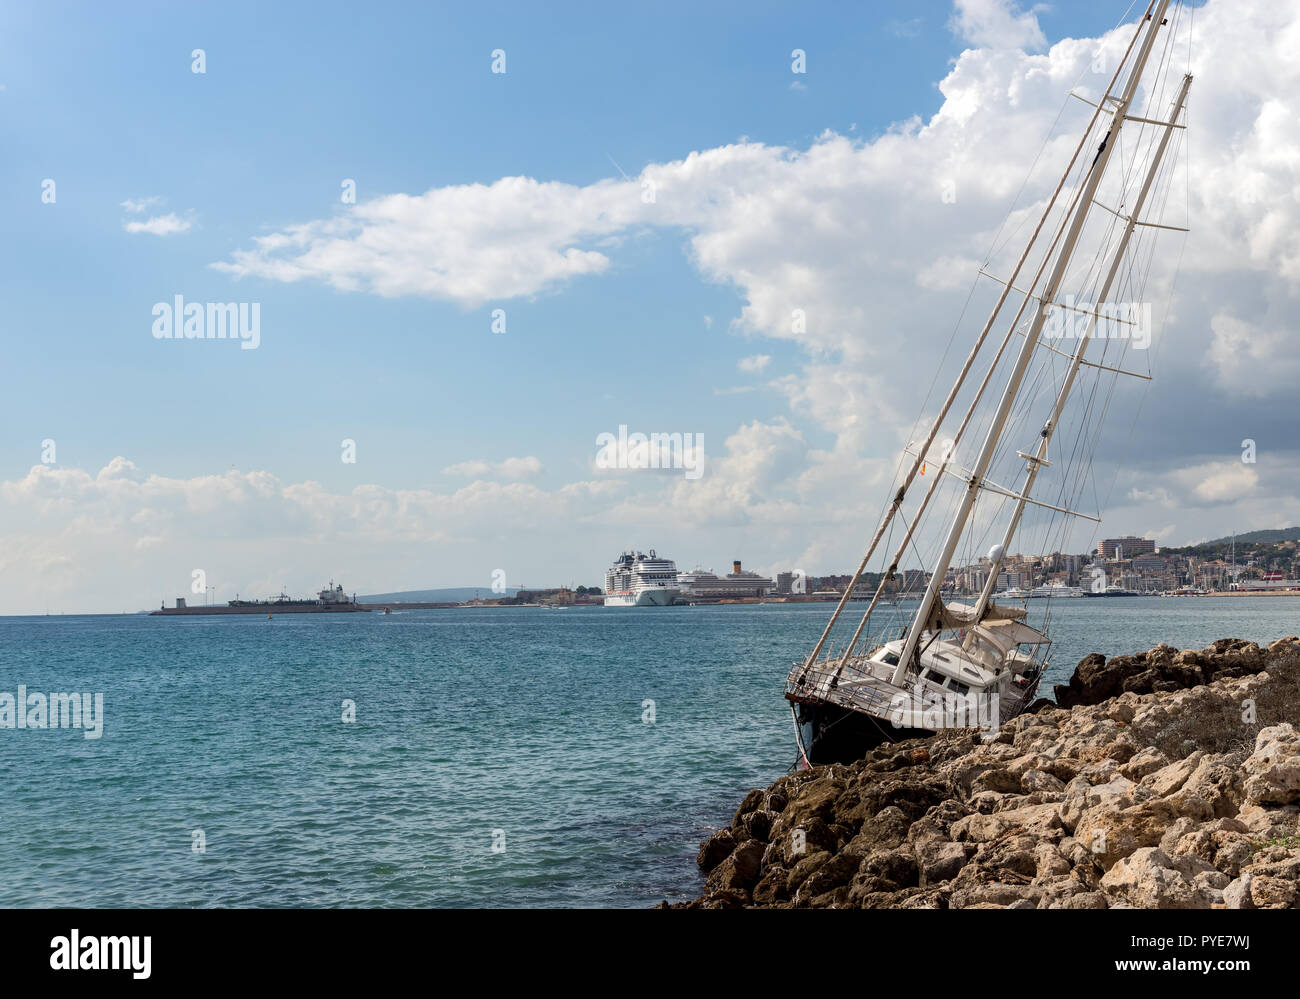 Yacht washed up on shore after storm in Palma de Mallorca Stock Photo